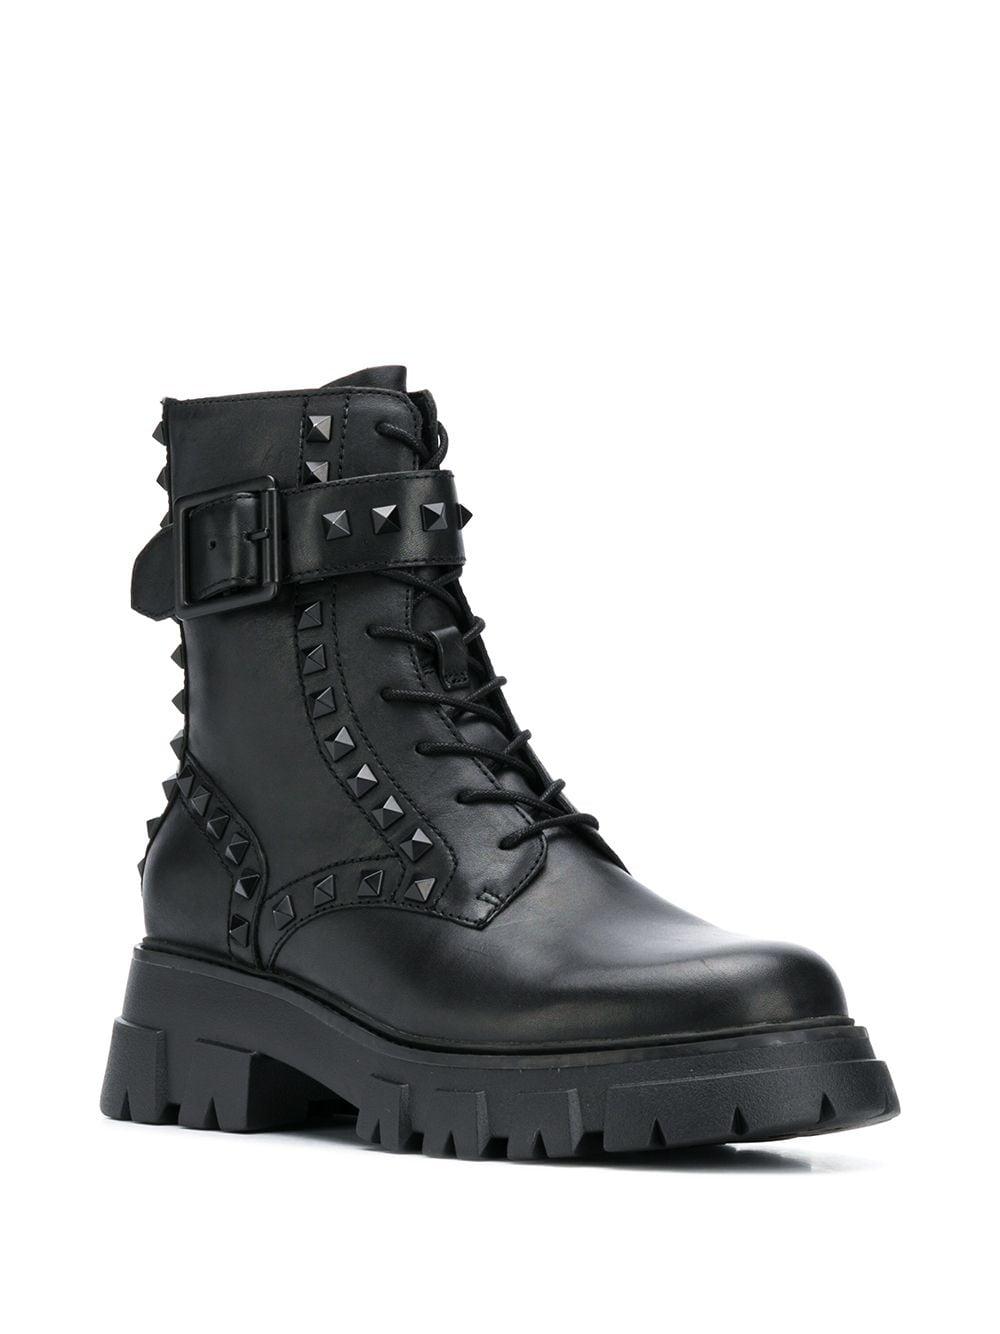 Ash Leather Lewis Stud Military Boots in Black - Lyst